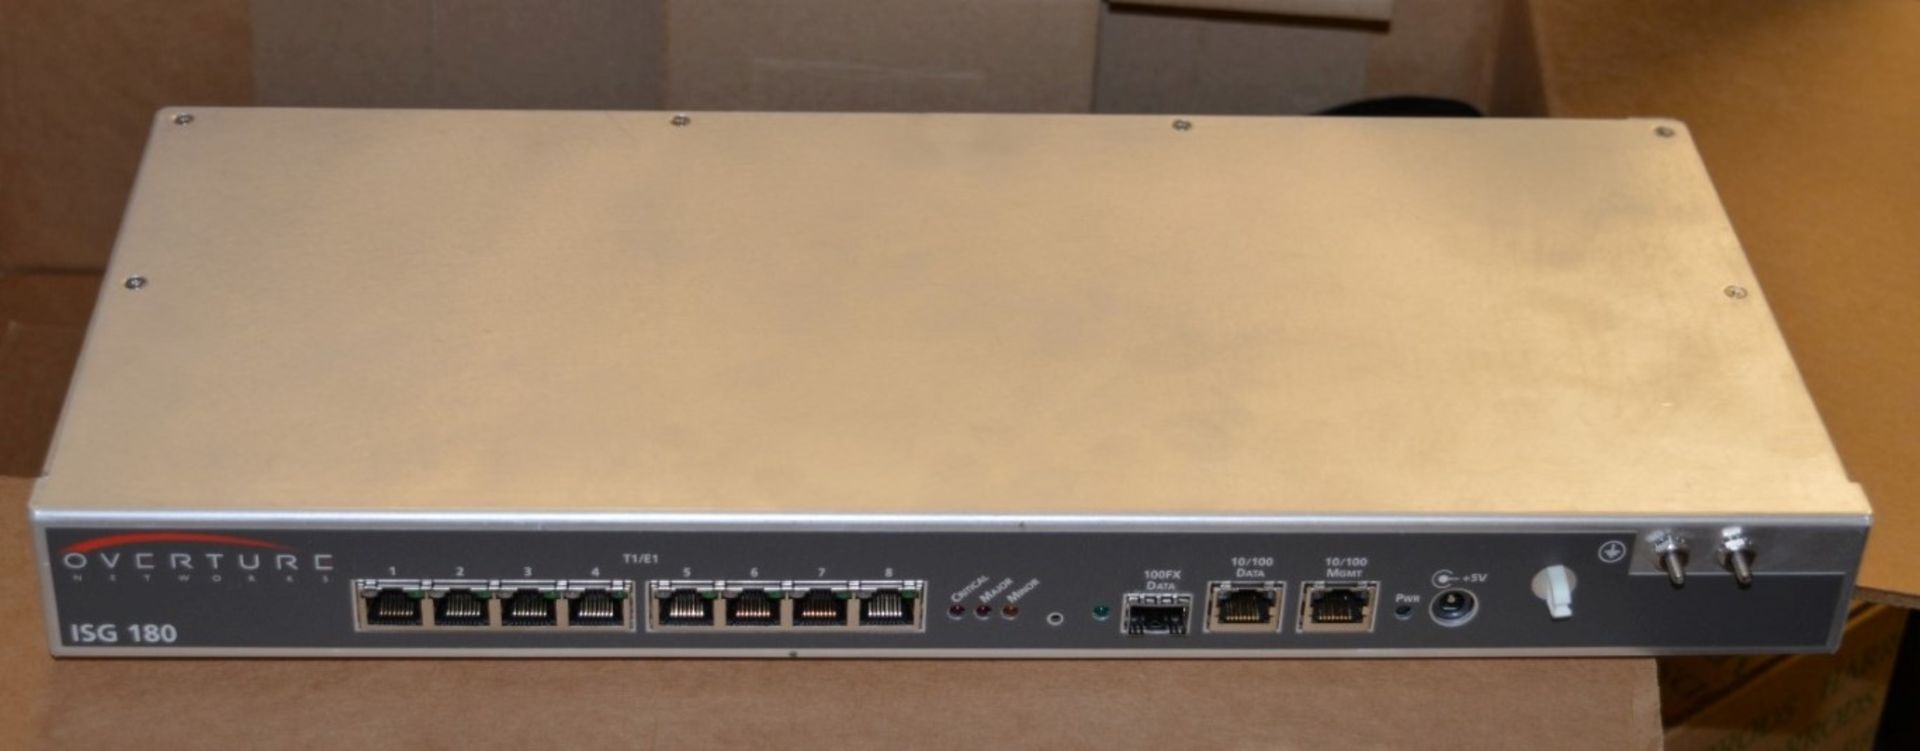 1 x Overture Networks ISG 180 Carrier Ethernet Over T1/E1 Edge - Model 5262-930A - Brand New and Box - Image 6 of 11